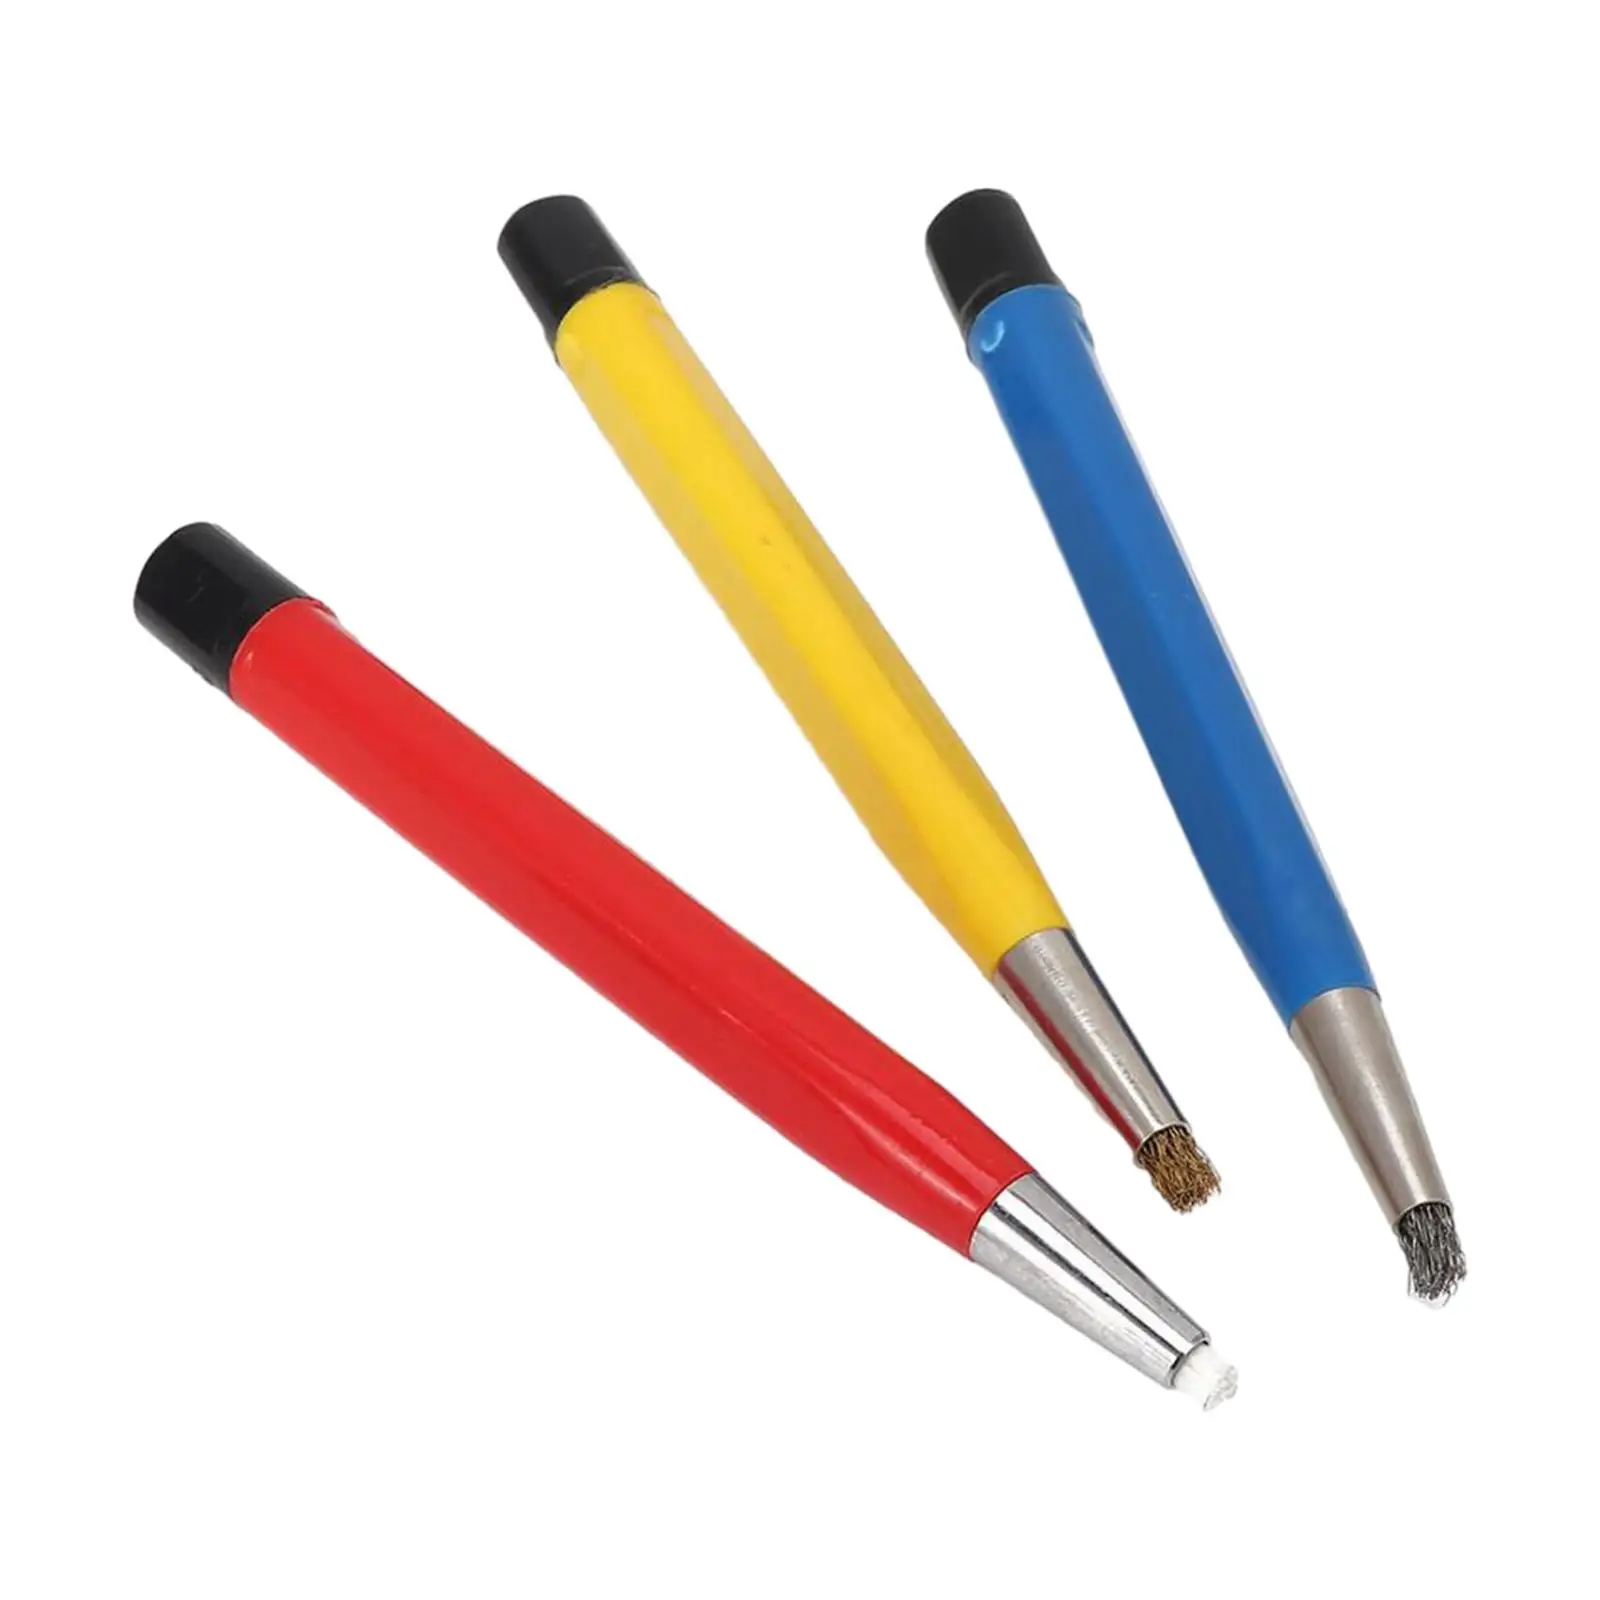 3x Scratch Brush Pen Set Cleaning Tool Watch Repair Fibre Scratch Brush Pen Sanding Brush for Electrical Circuit Boards Jewelry